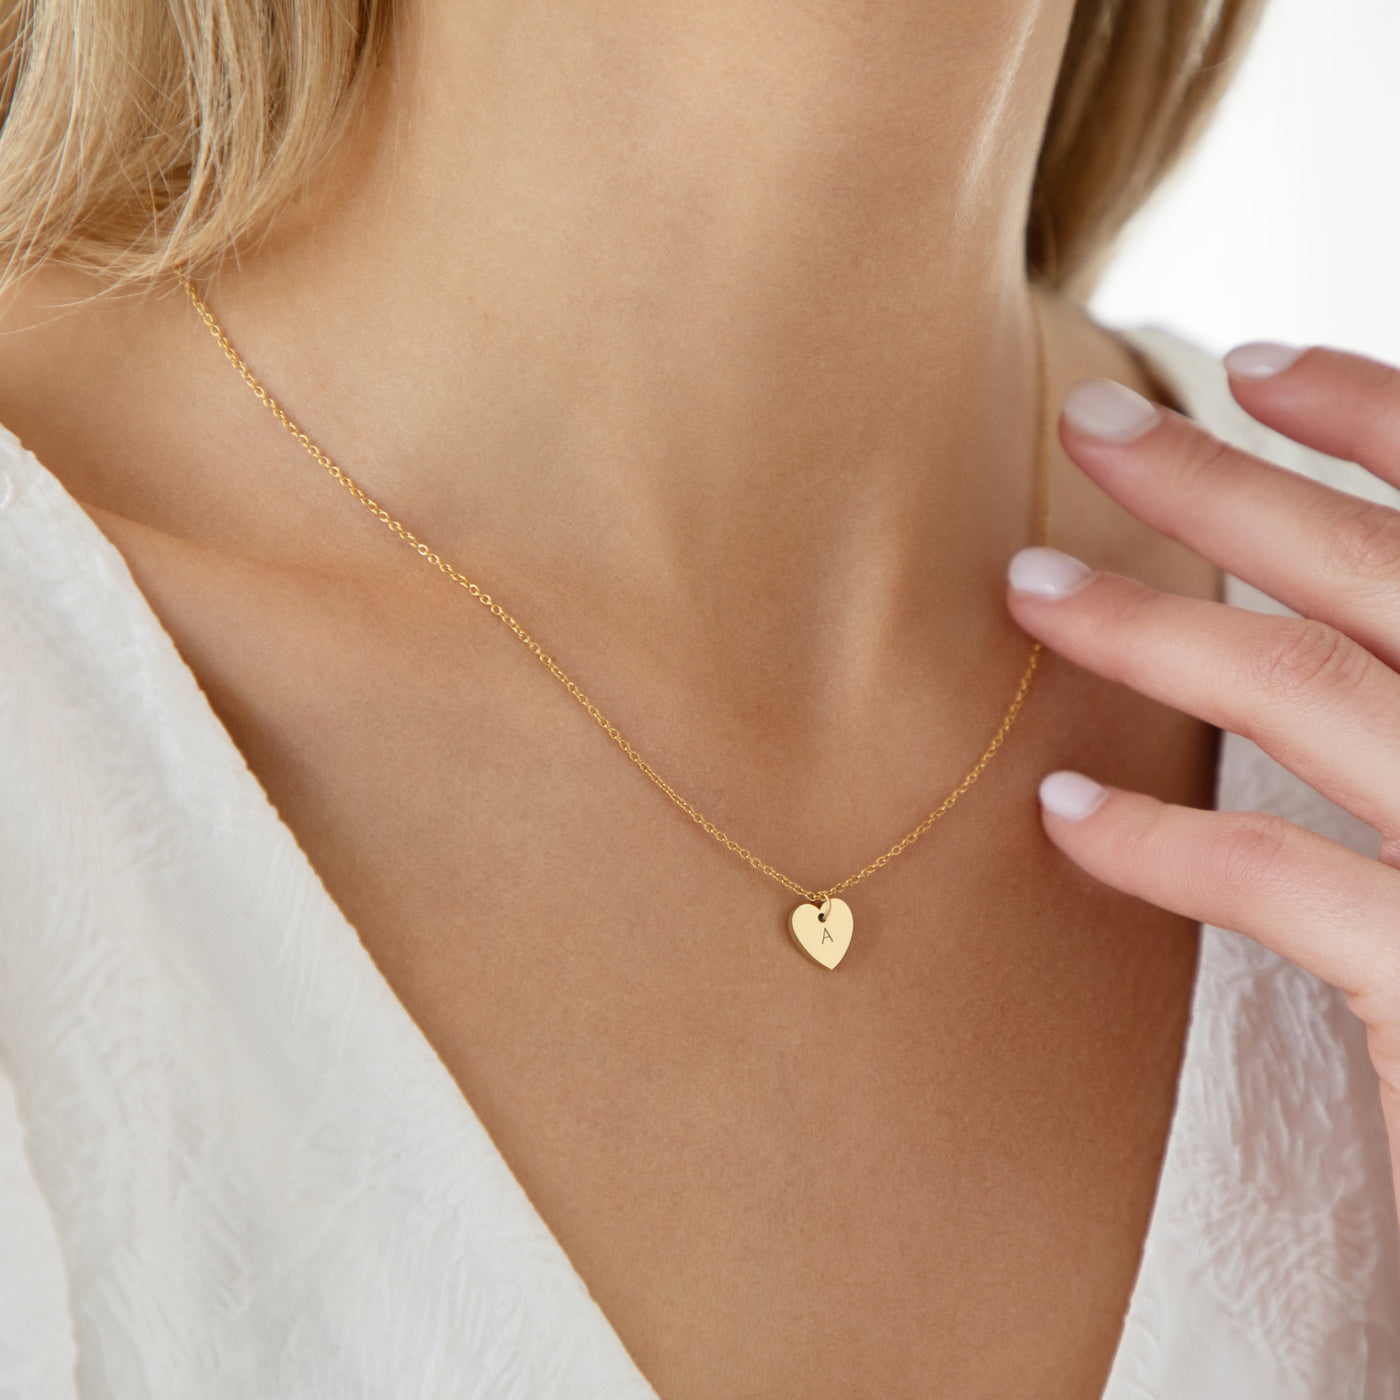 Amore Heart Necklace in Gold